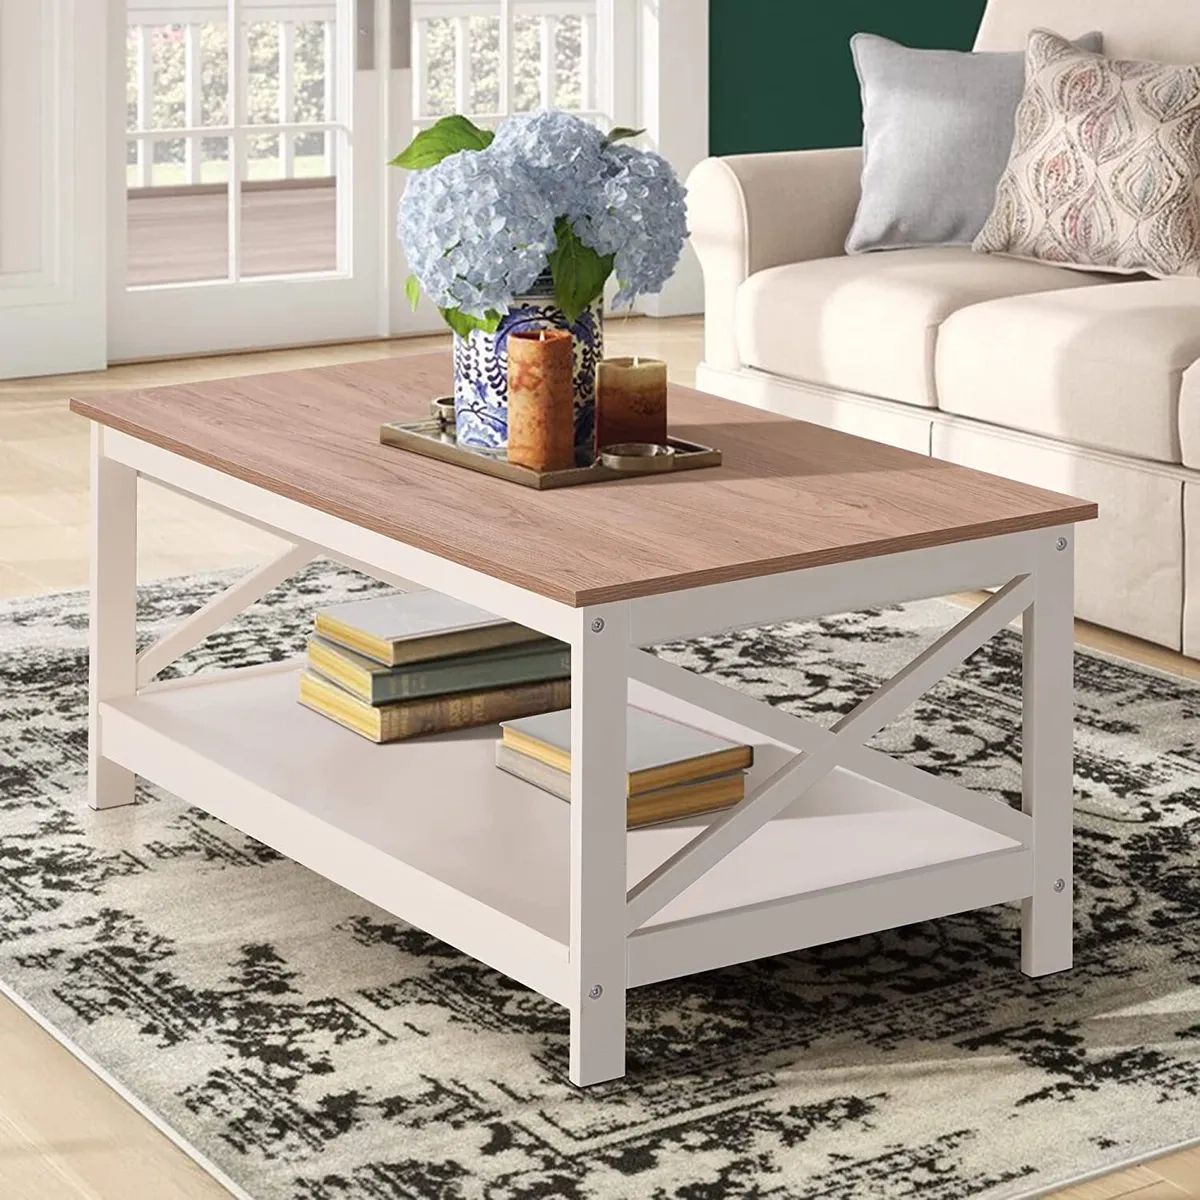 X Shape Design Coffee Table Modern Rustic Coffee Table W/ Storage Shelf 2  Tiers | Ebay Intended For Modern Wooden X Design Coffee Tables (View 4 of 15)